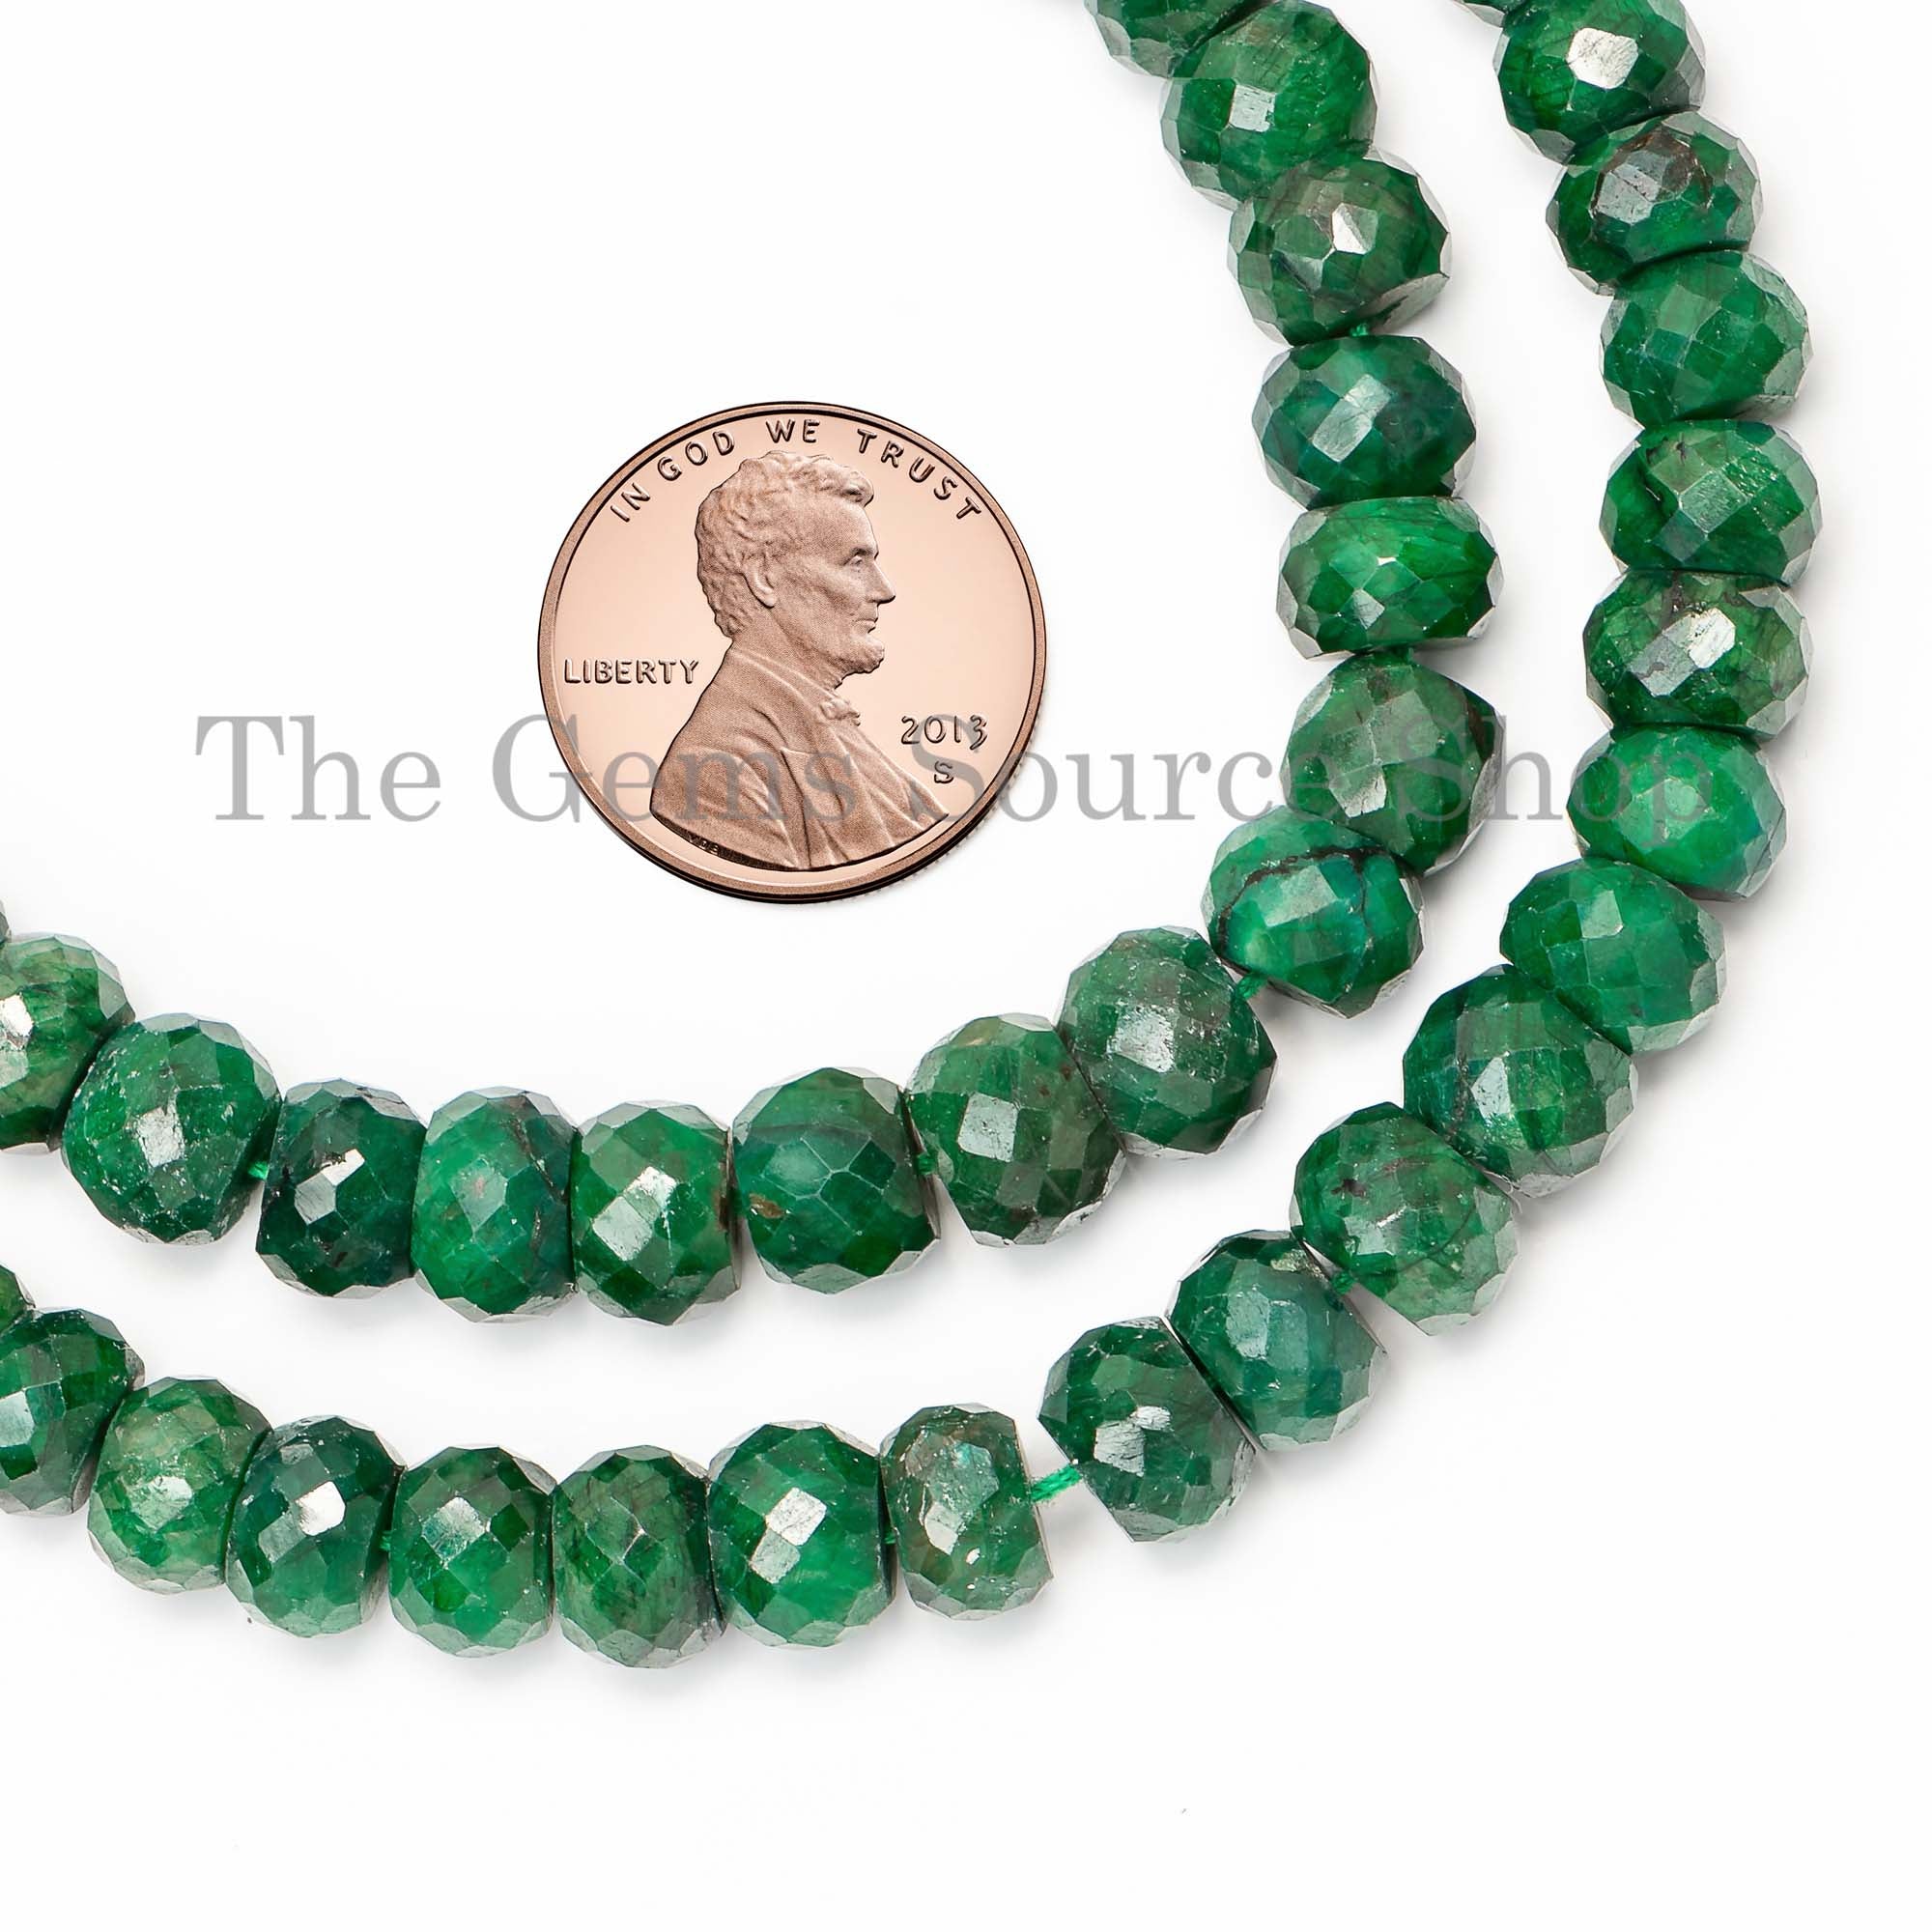 6-8mm Emerald Faceted Rondelle Beads, Faceted Emerald Beads, Rondelle Emerald Beads